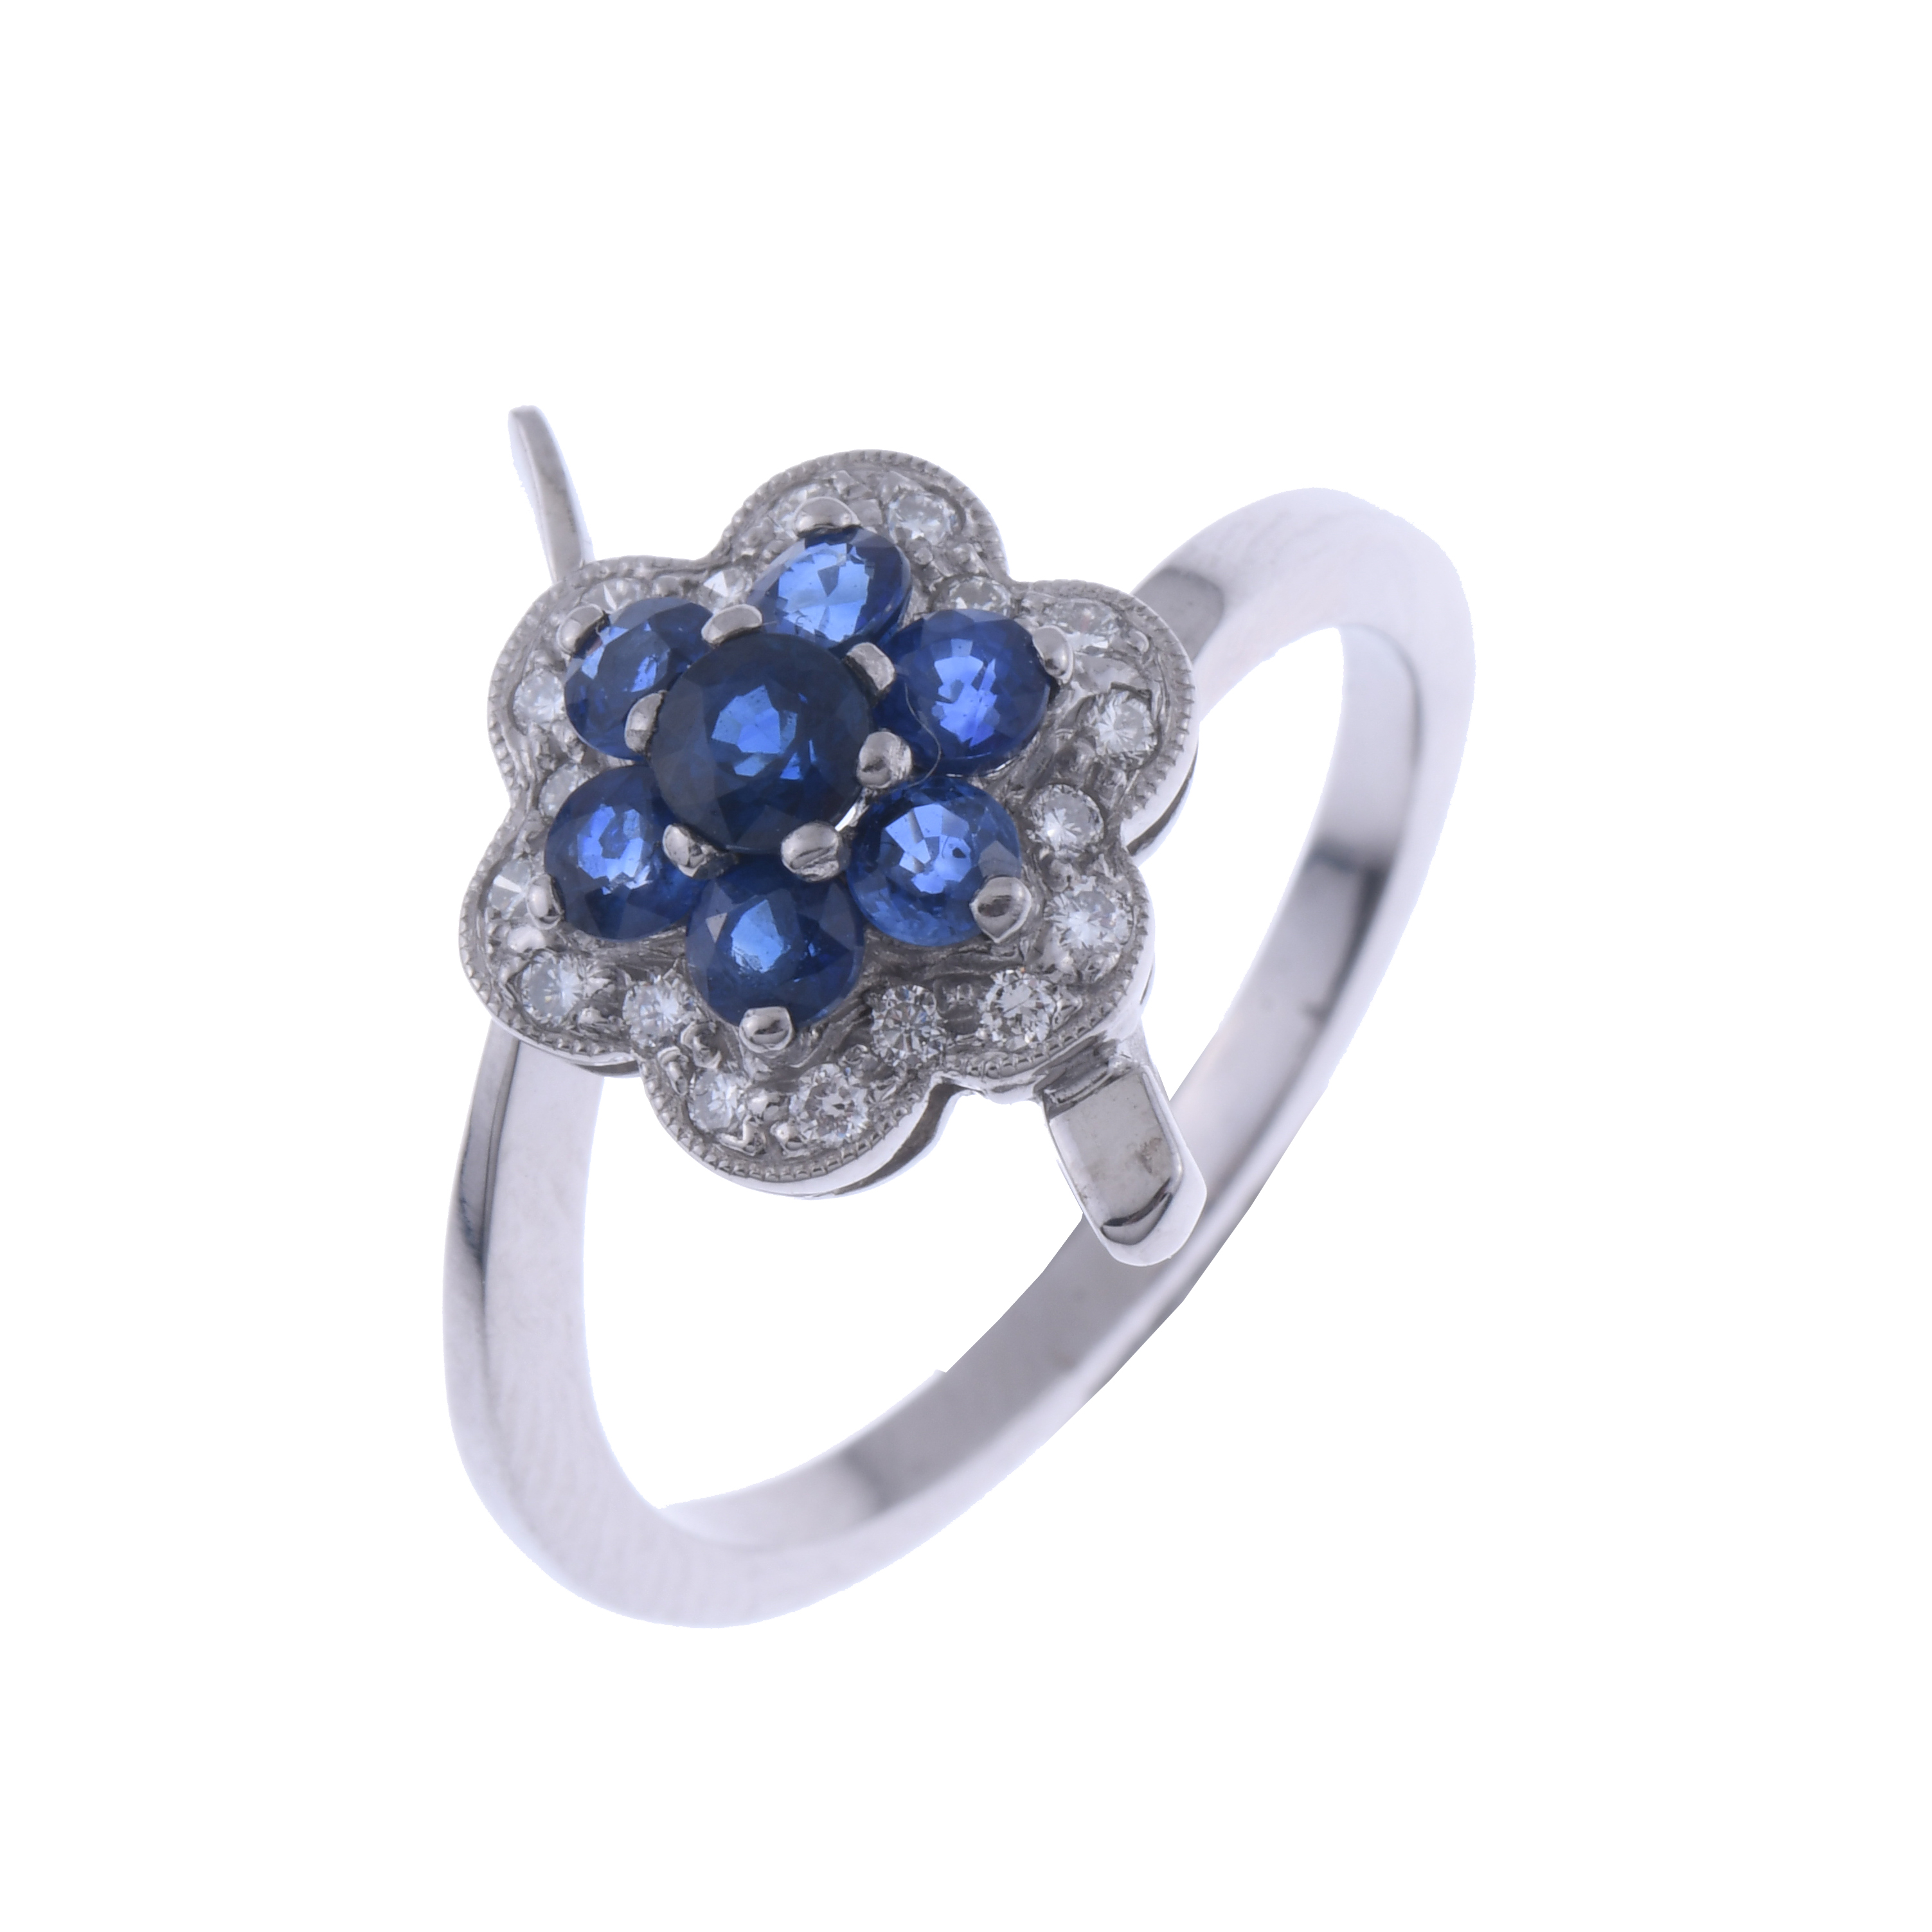 SAPPHIRES AND DIAMONDS FLORAL RING.